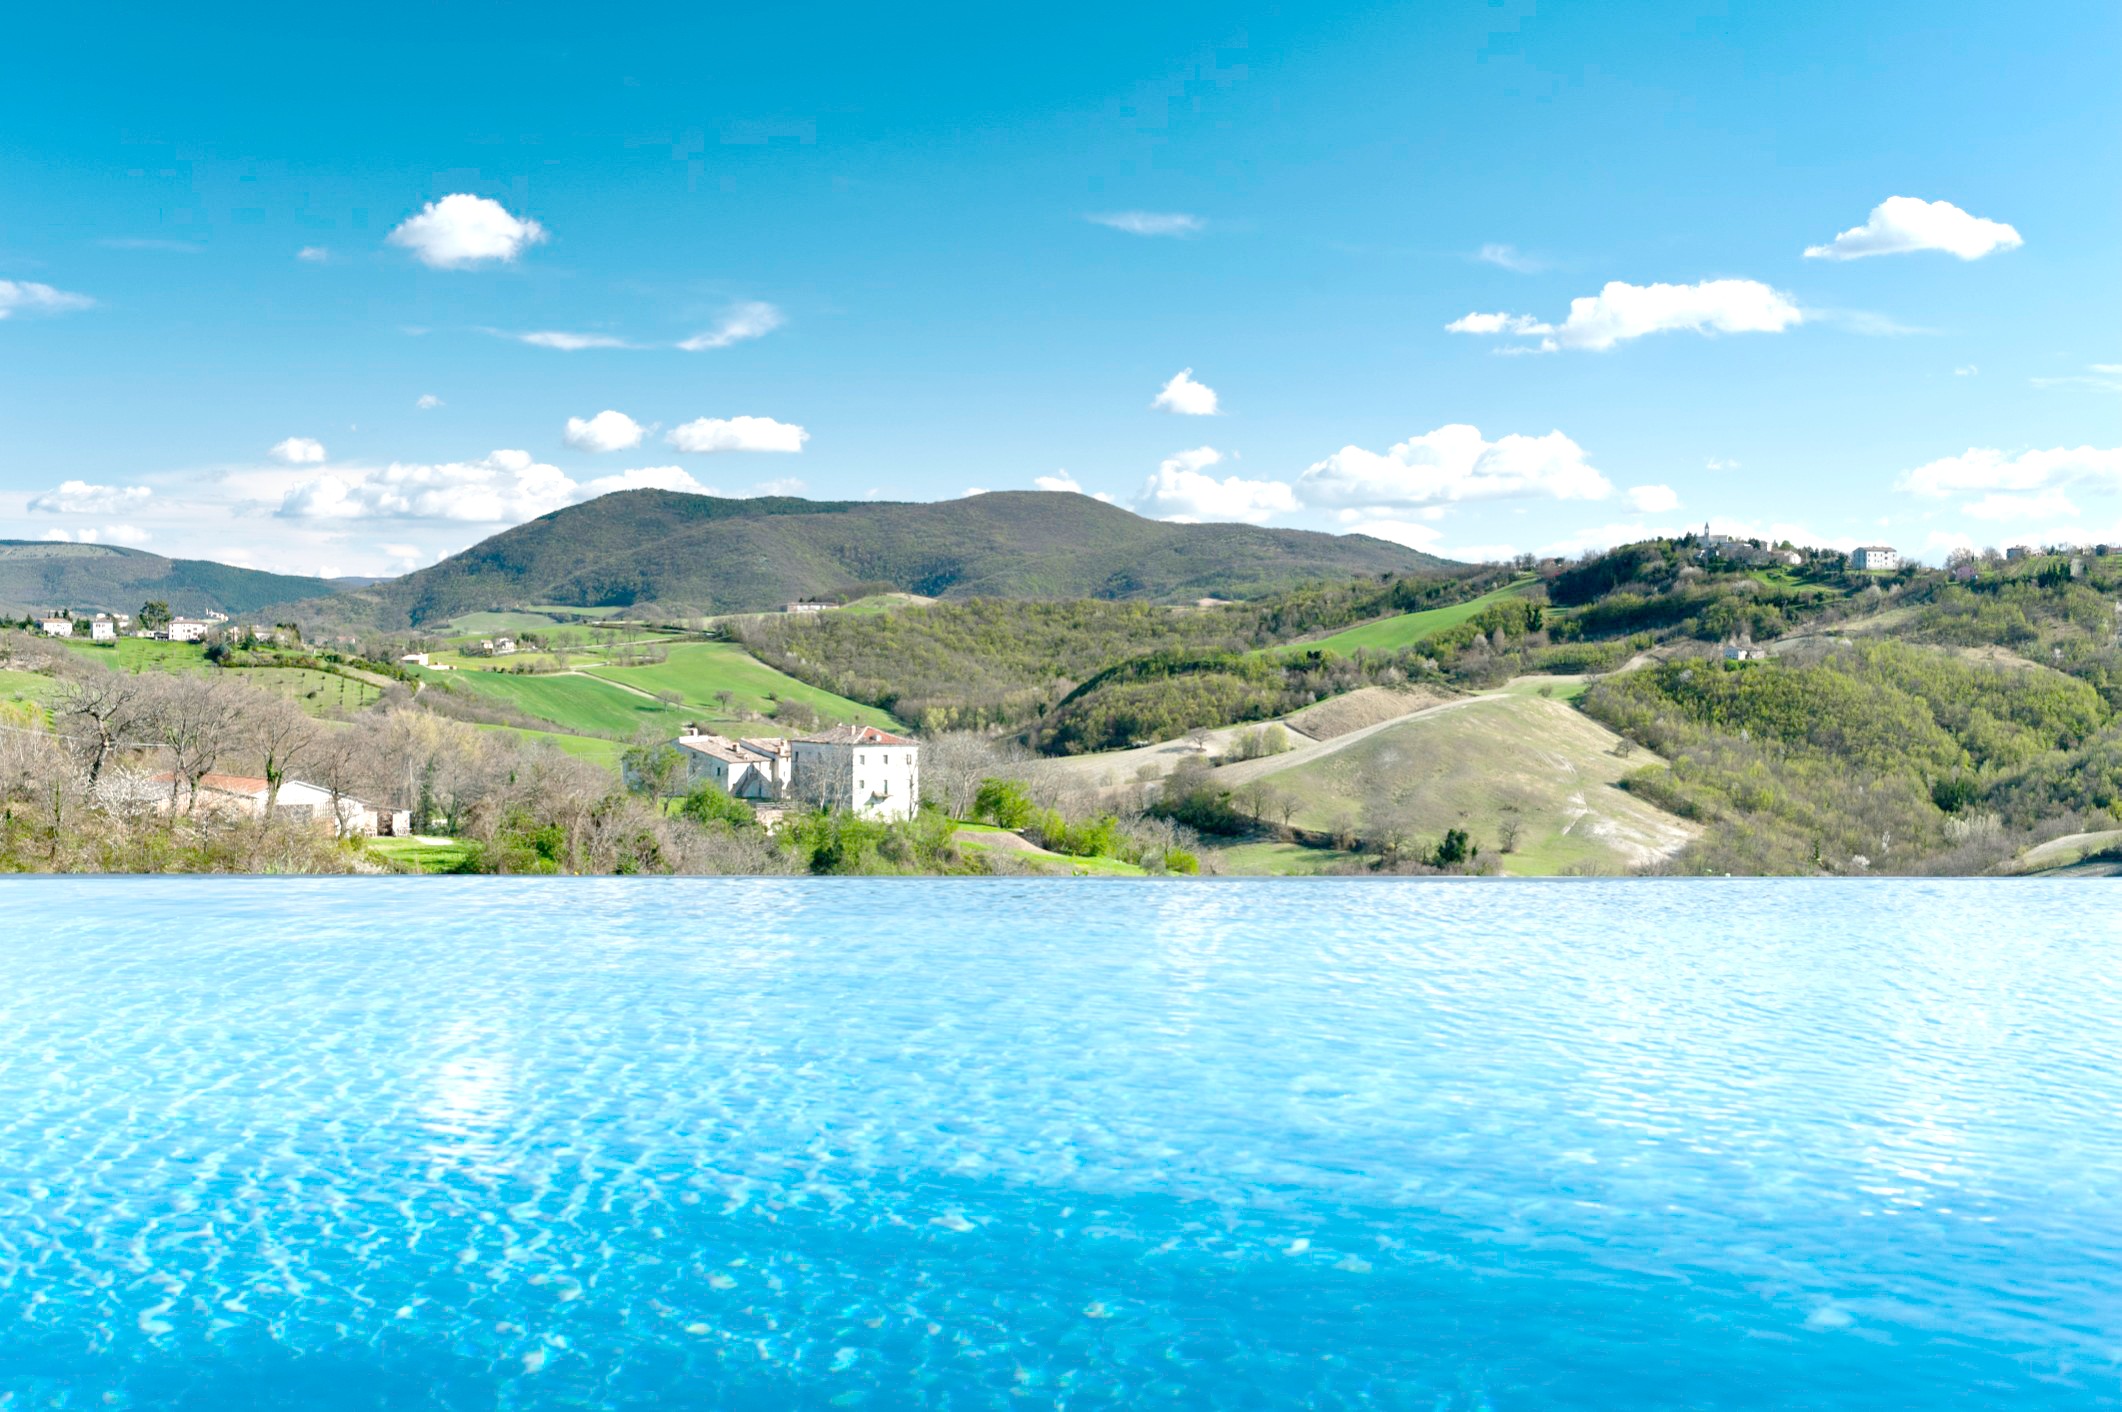 Borgo Tranquillo, villa rental in Le Marche, Italy. Beautiful view of the countryside from the infinity pool